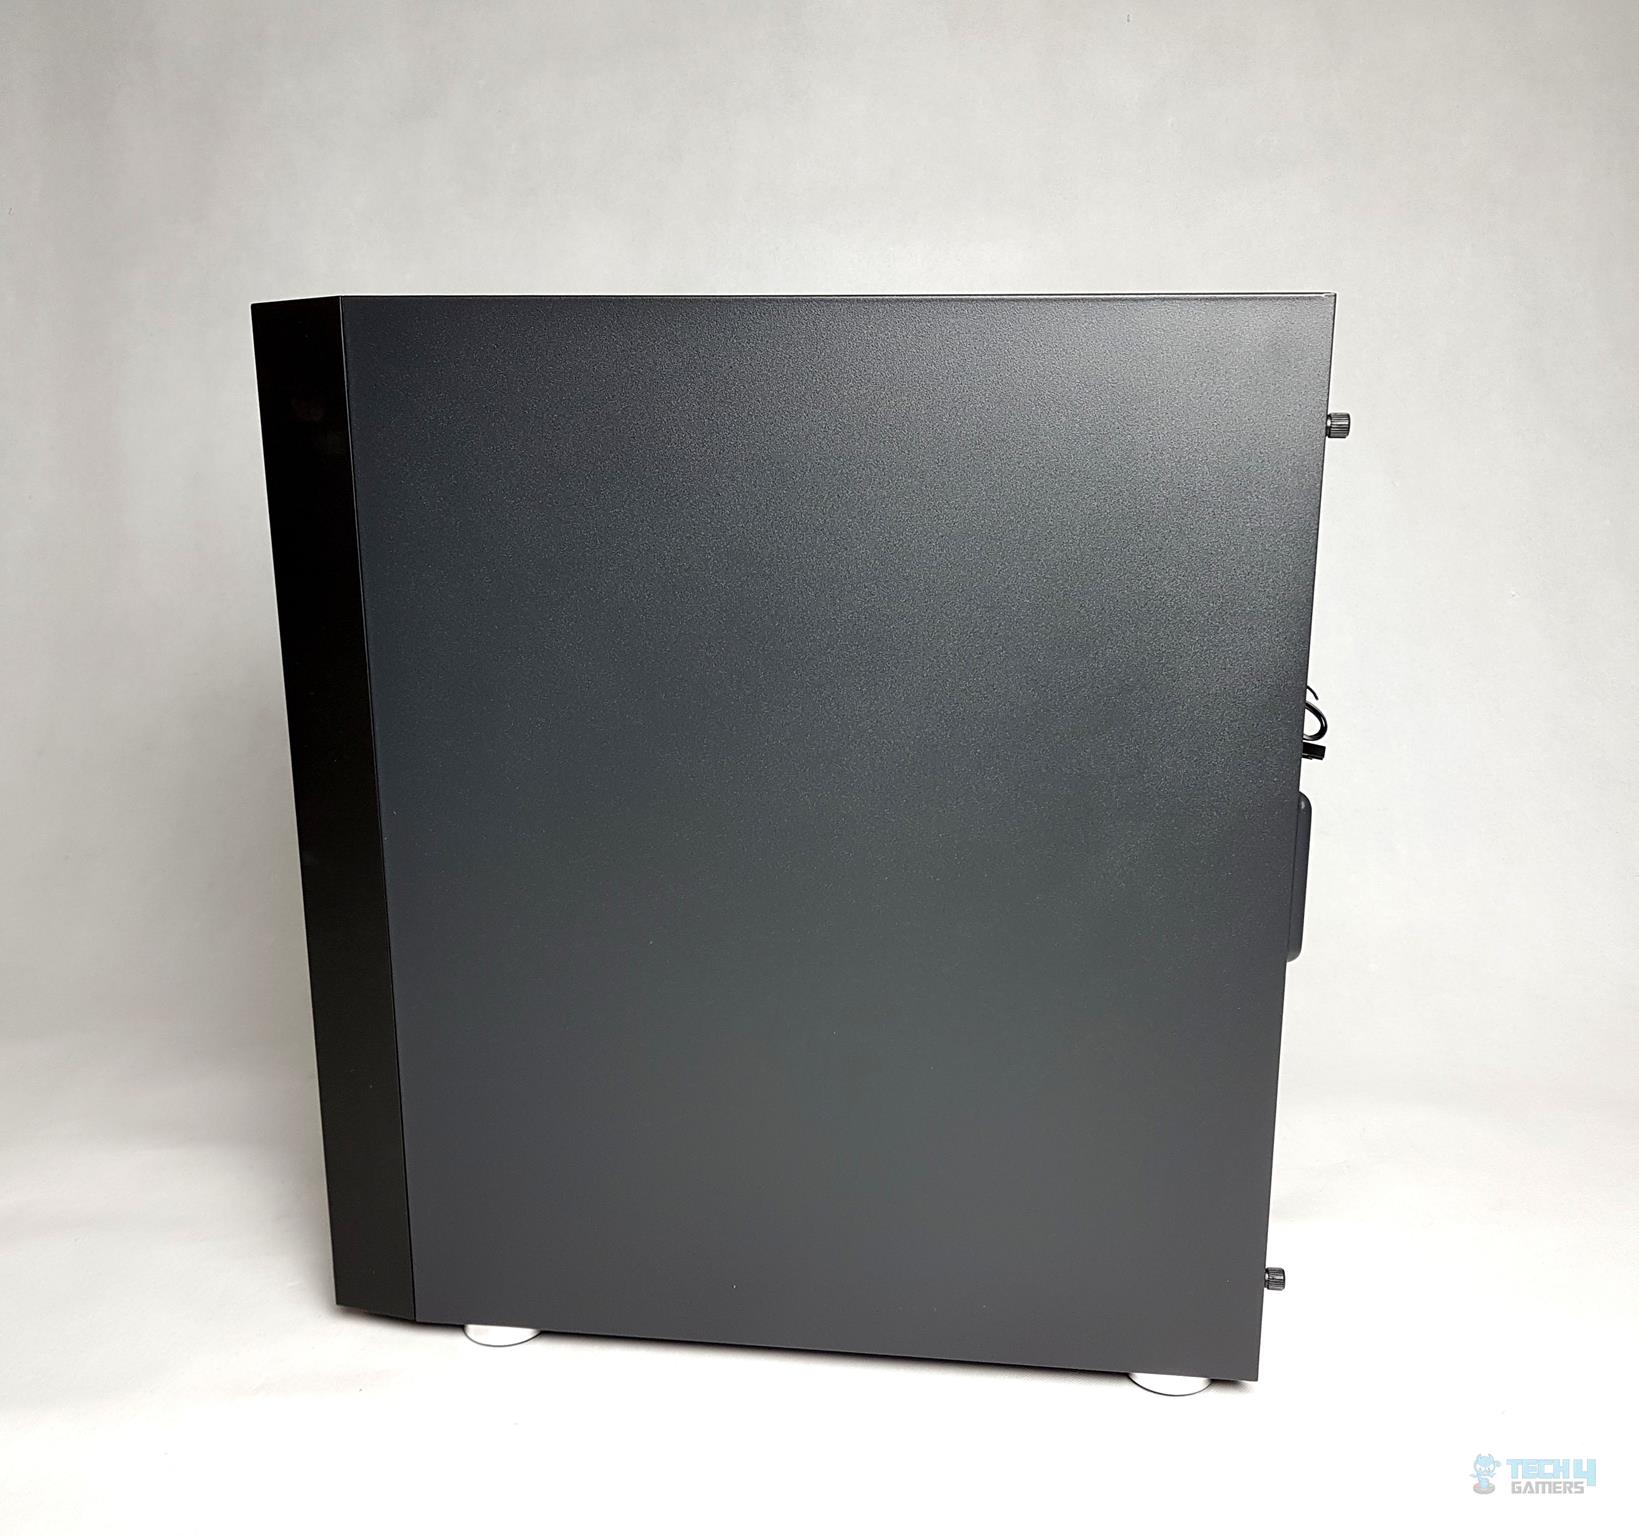  Aerocool Quartz Revo RGB Mid-Tower Chassis — The other side of the chassis